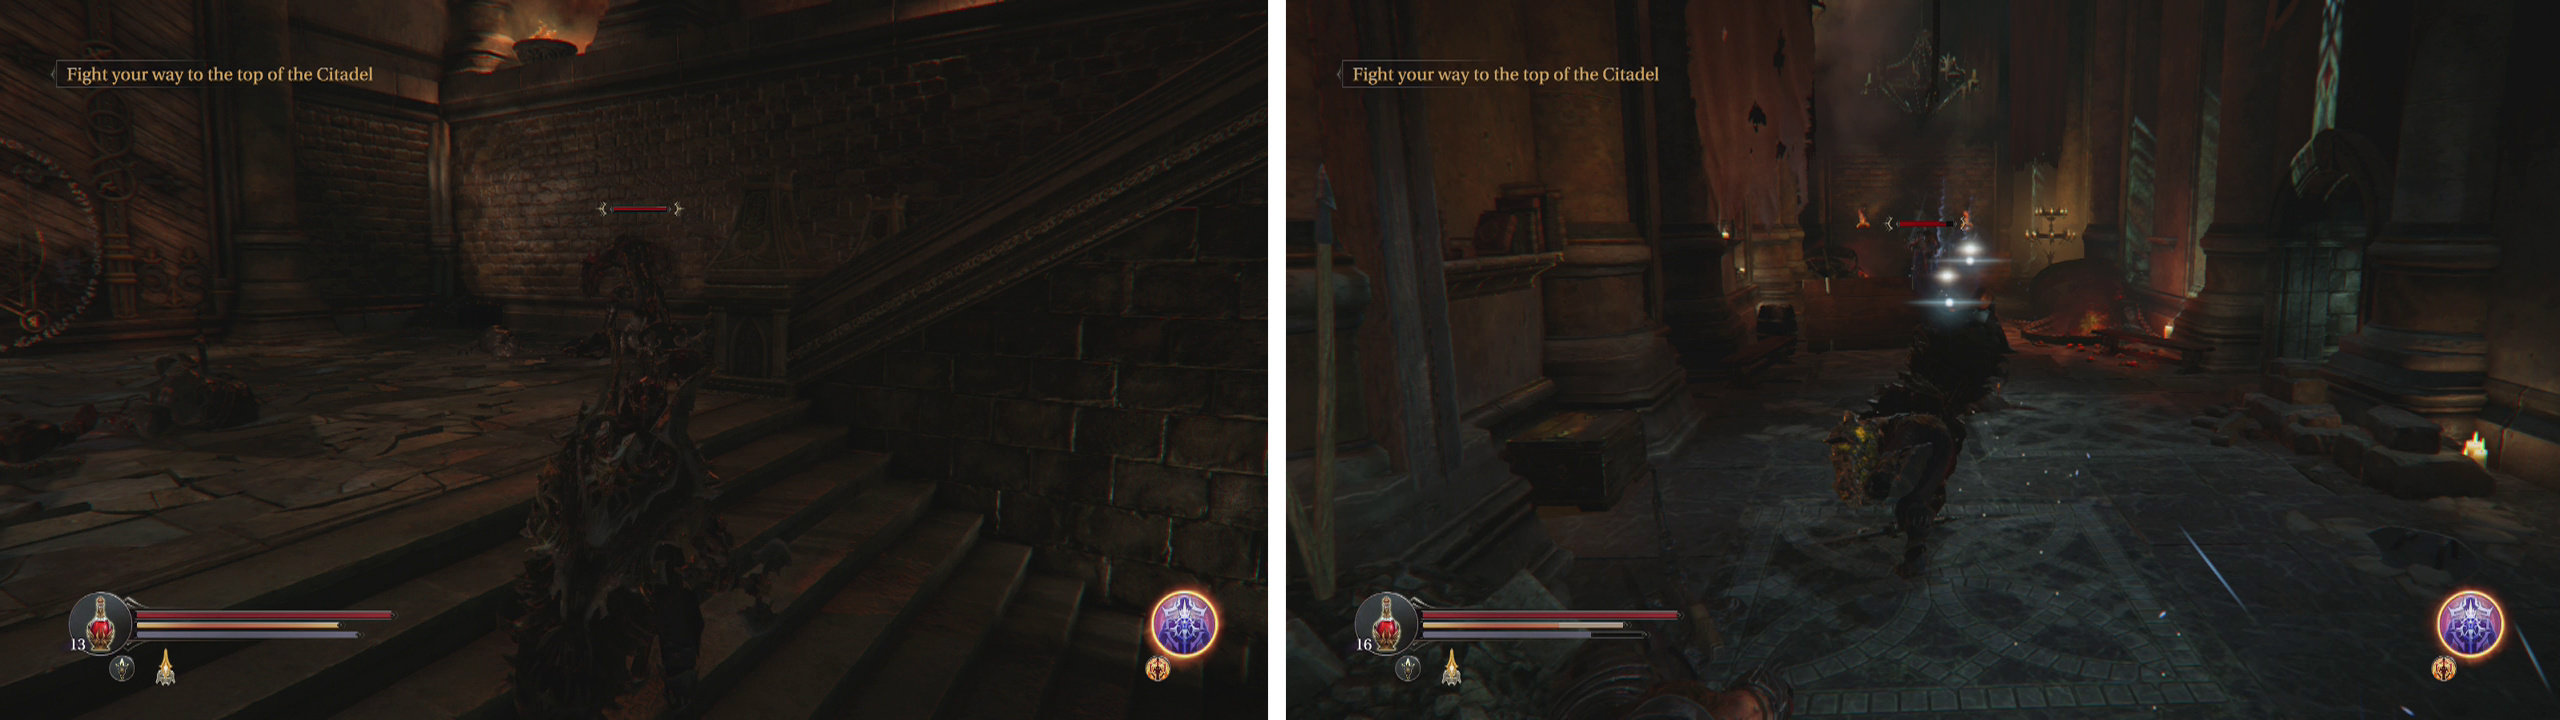 Climb up from the Flooded Hallway to reach the Citadel (left). Fight your way up the stairs and kill the Spellcaster at the end of the hallway (right).